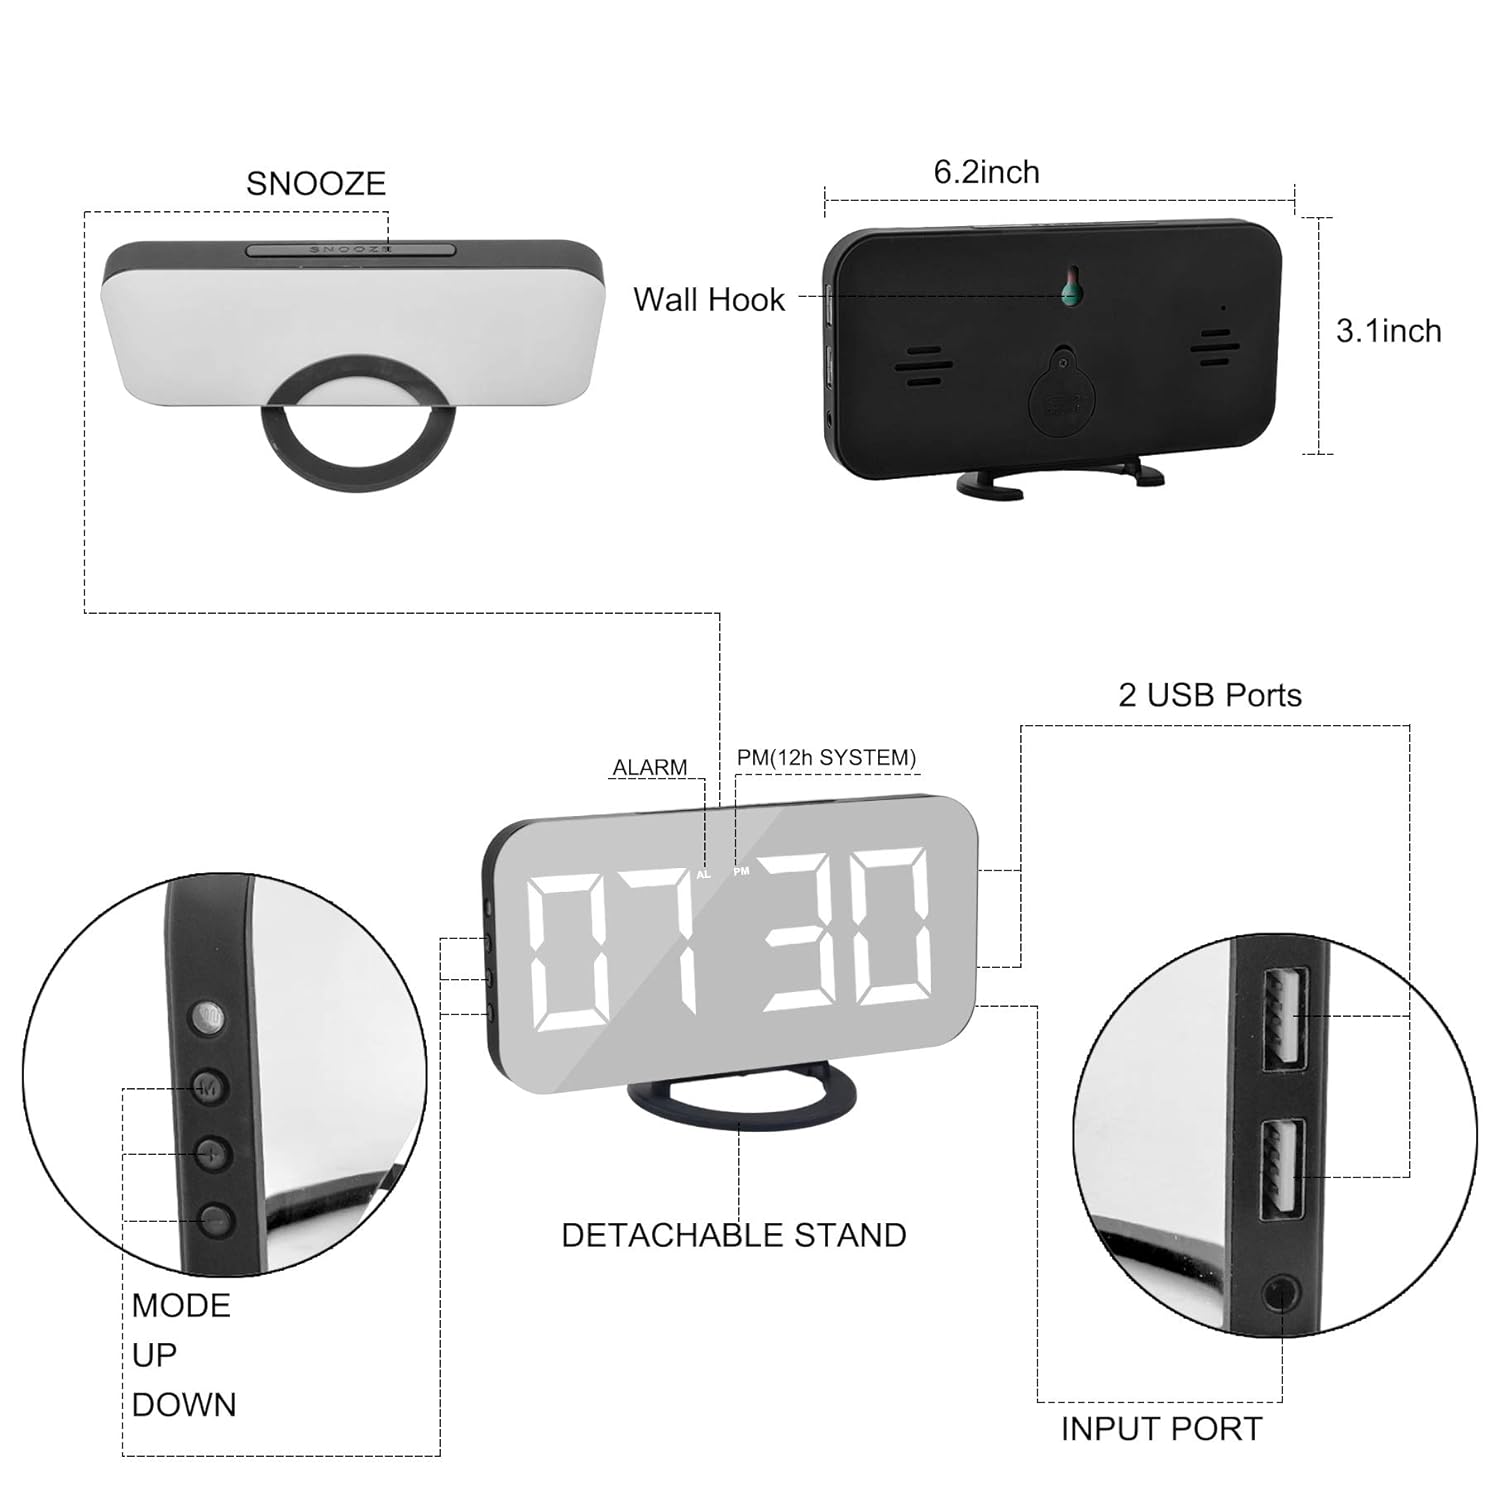 Digital Clock Large Display, LED Alarm Electric Clock Mirror Surface for Makeup with Diming Mode, 3 Levels Brightness, Dual USB Ports Modern Decoration for Home Bedroom Decor-Black